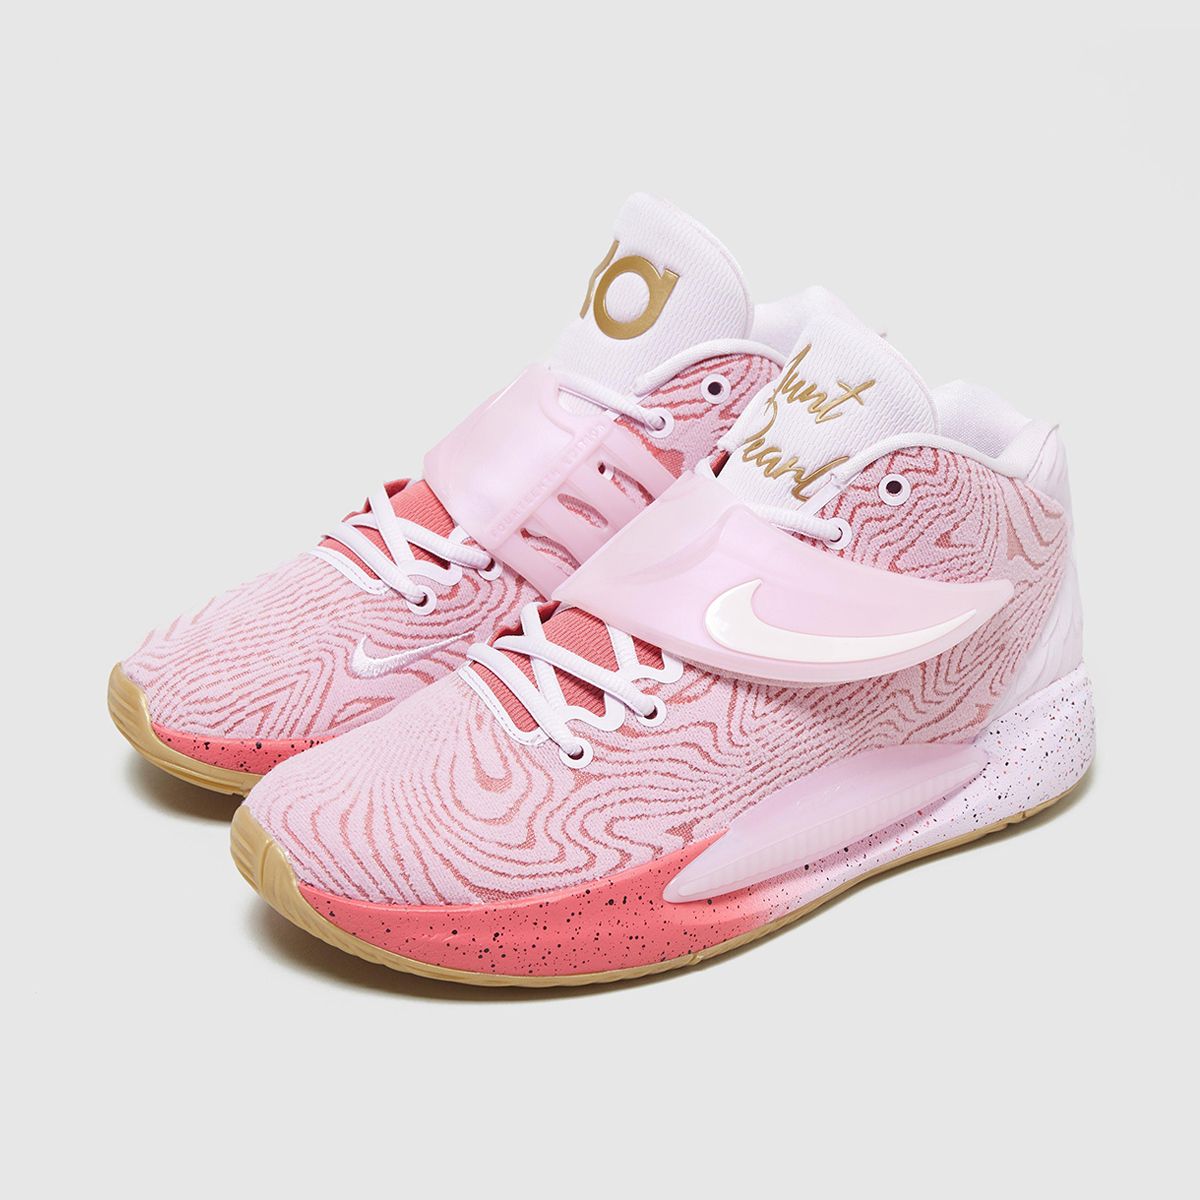 Available Now // Nike KD 14 “Aunt Pearl” | House of Heat°